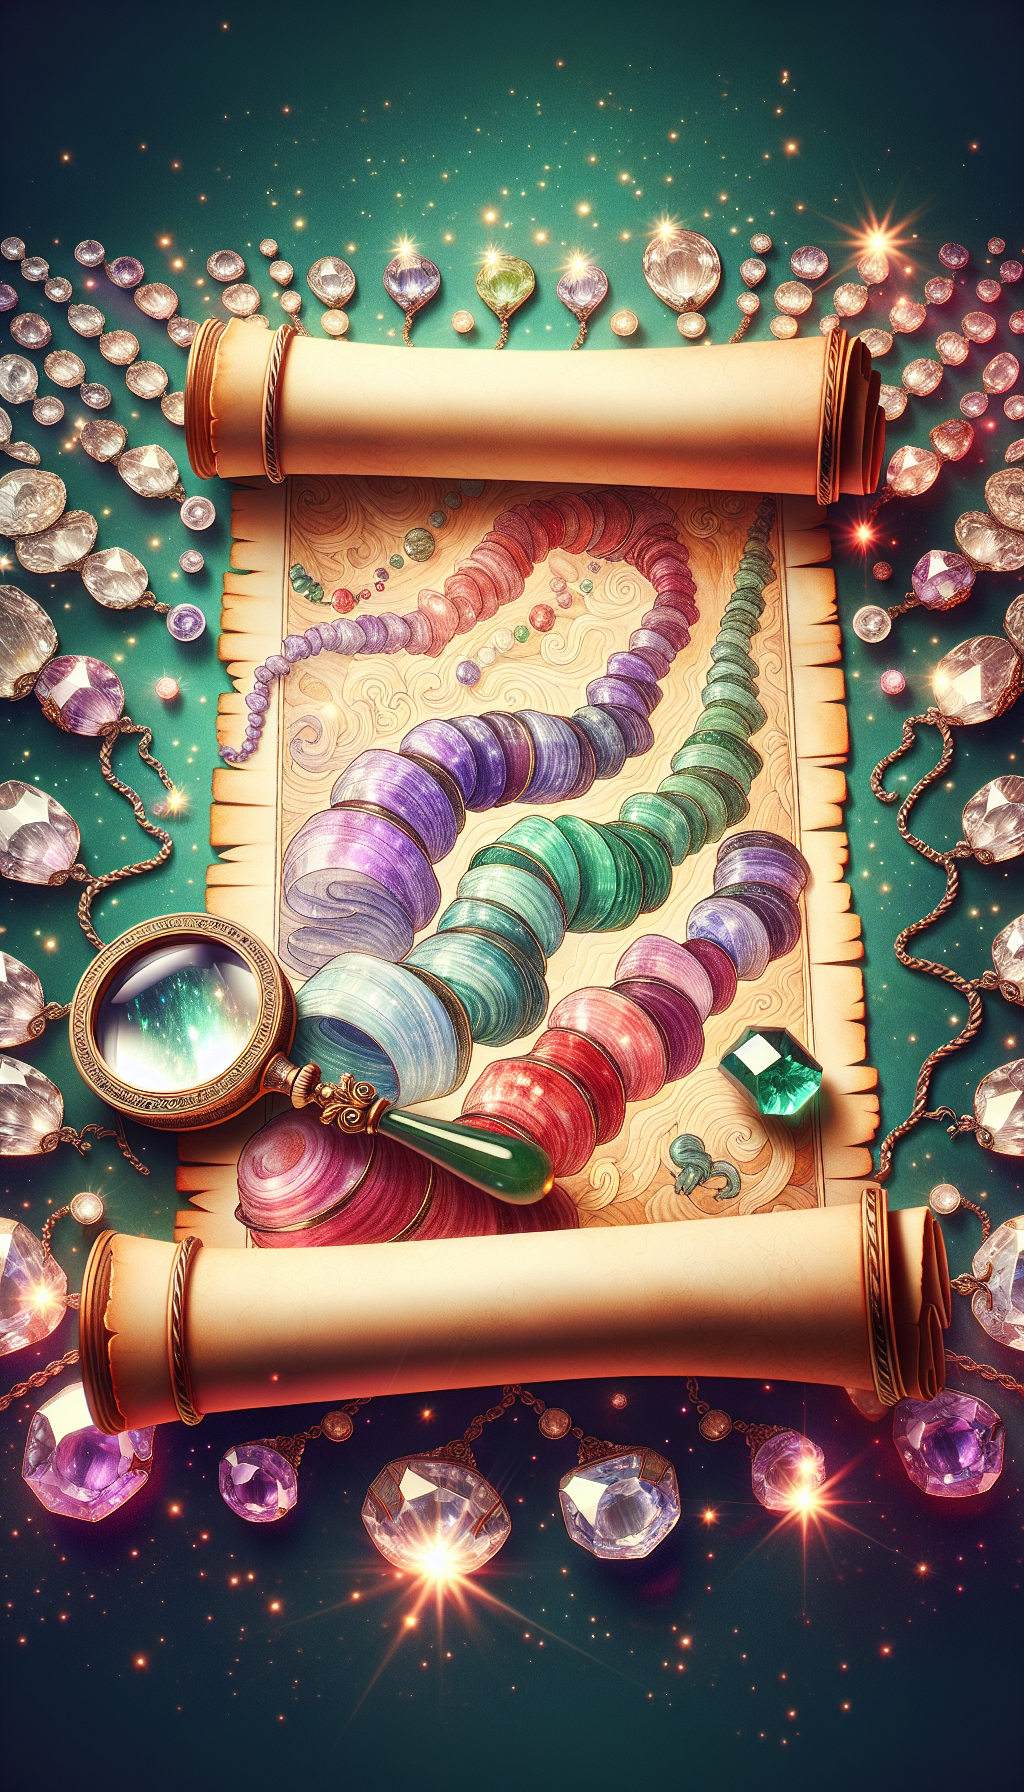 An illustration depicts a whimsical ancient scroll unfurling to reveal various shades of jade, each color flowing into the next—emerald green, lavender, red, and white. Perched atop, an antique jeweler's loupe magnifies a classical jade necklace, illuminating the intricacies and value, symbolizing appraisal amidst a constellation of shimmering faceted jade jewels in the background, forming a timeline of a bygone era.